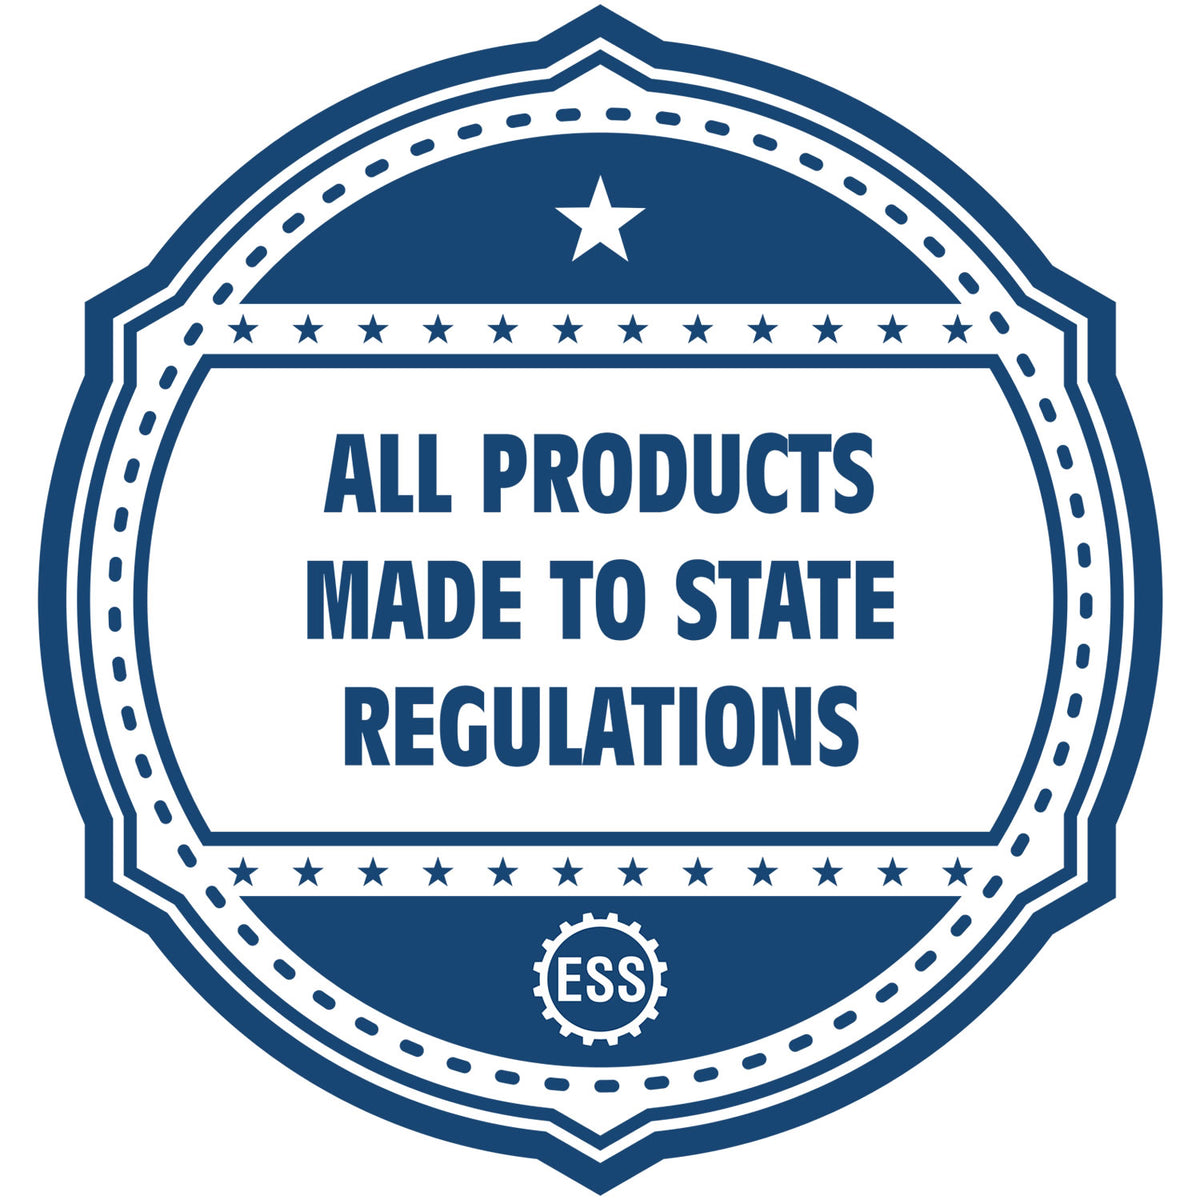 An icon or badge element for the Slim Pre-Inked Nevada Professional Engineer Seal Stamp showing that this product is made in compliance with state regulations.